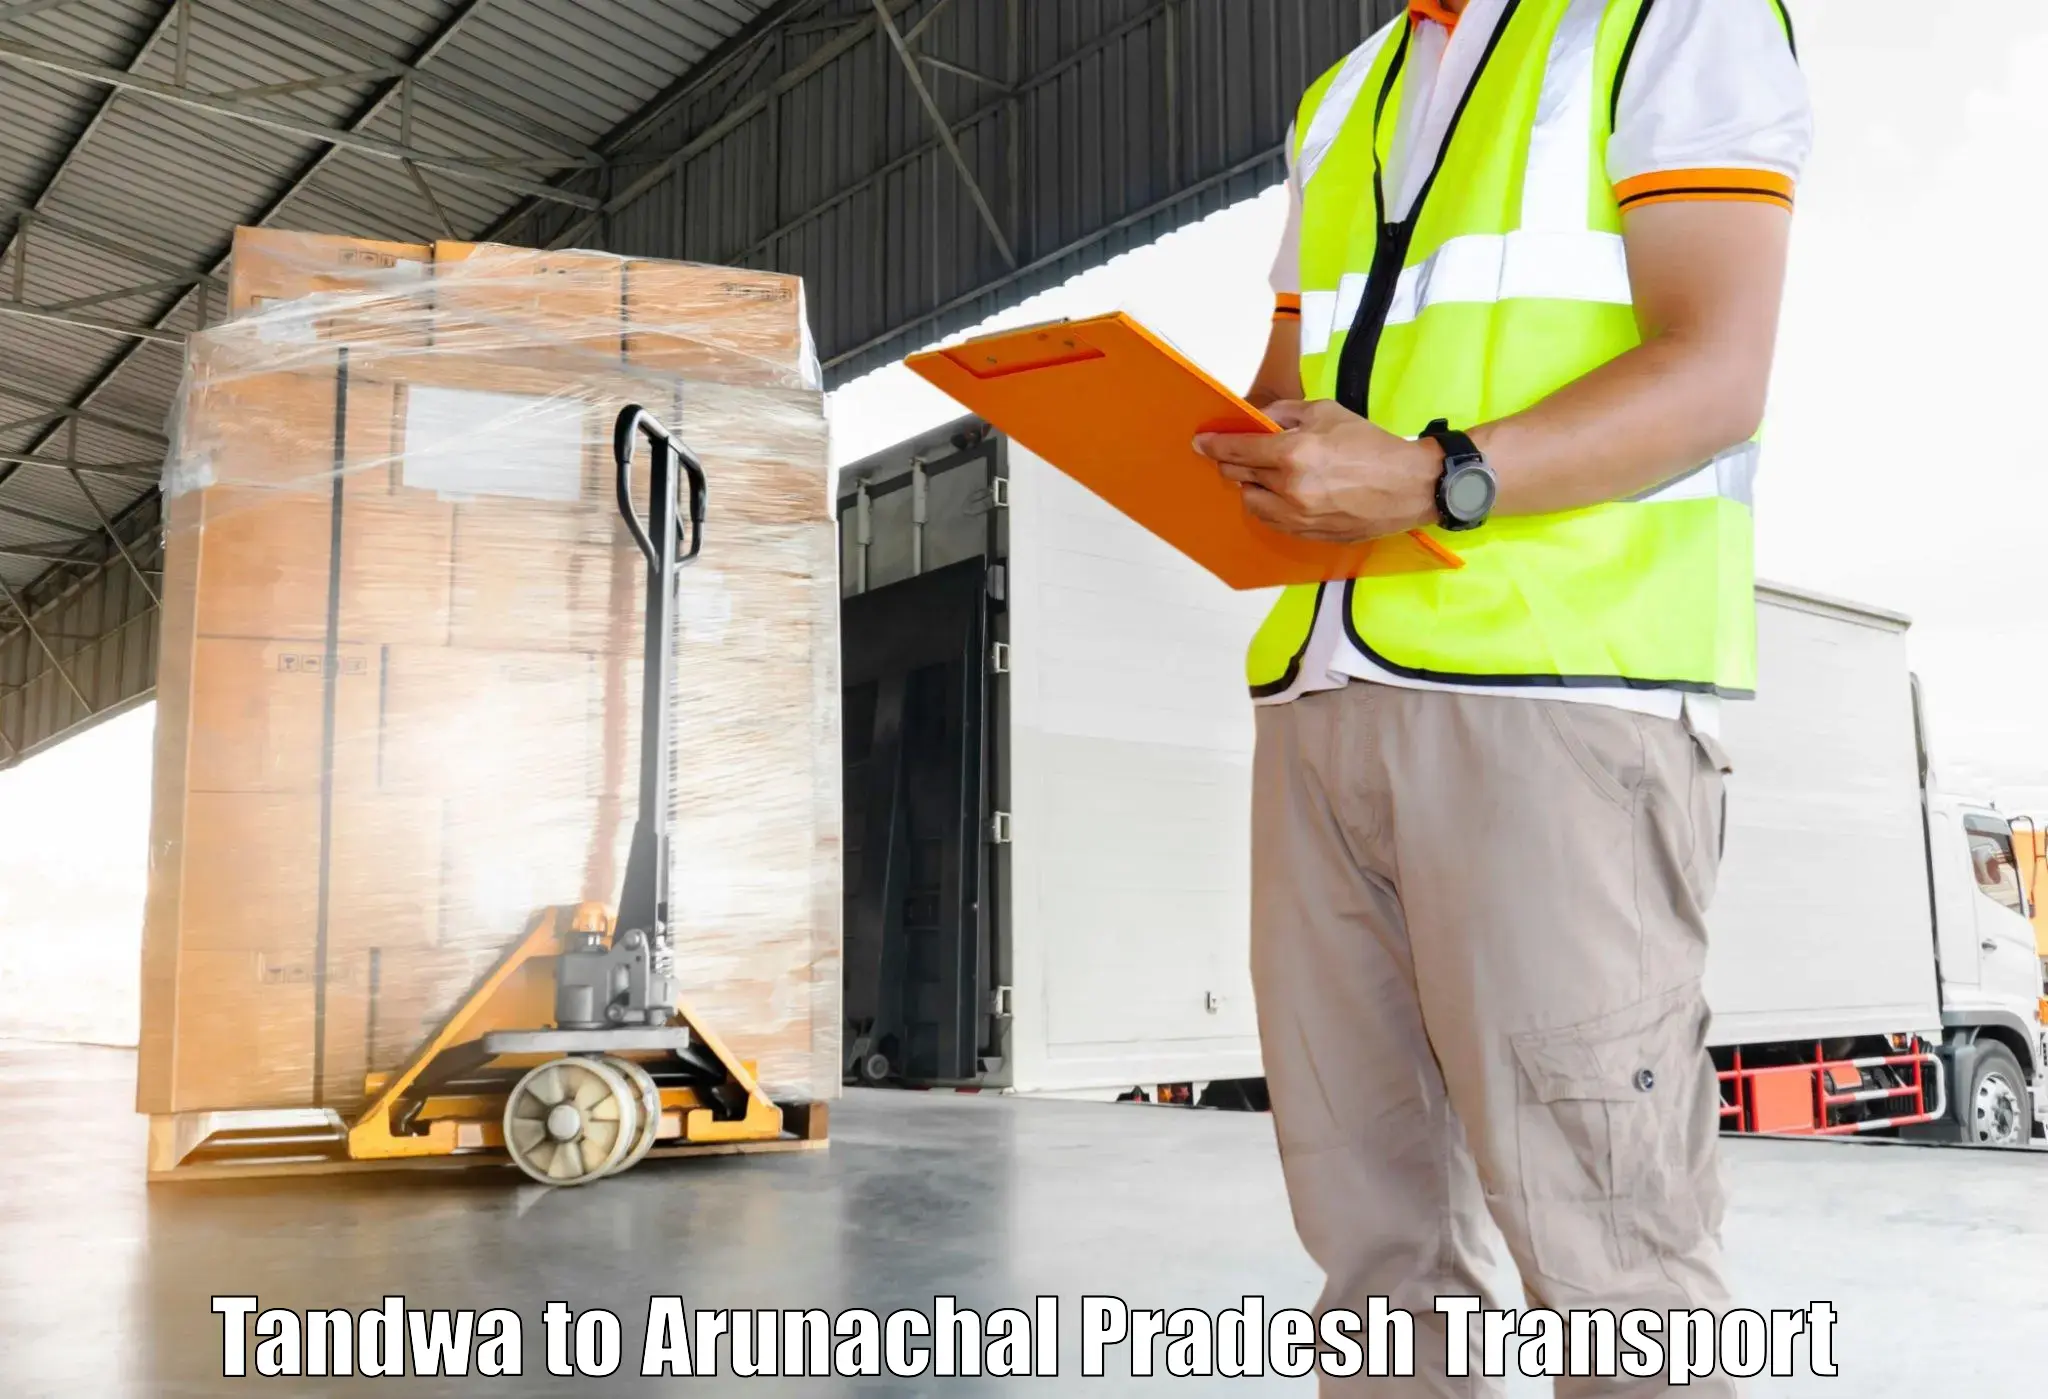 Express transport services Tandwa to Aalo